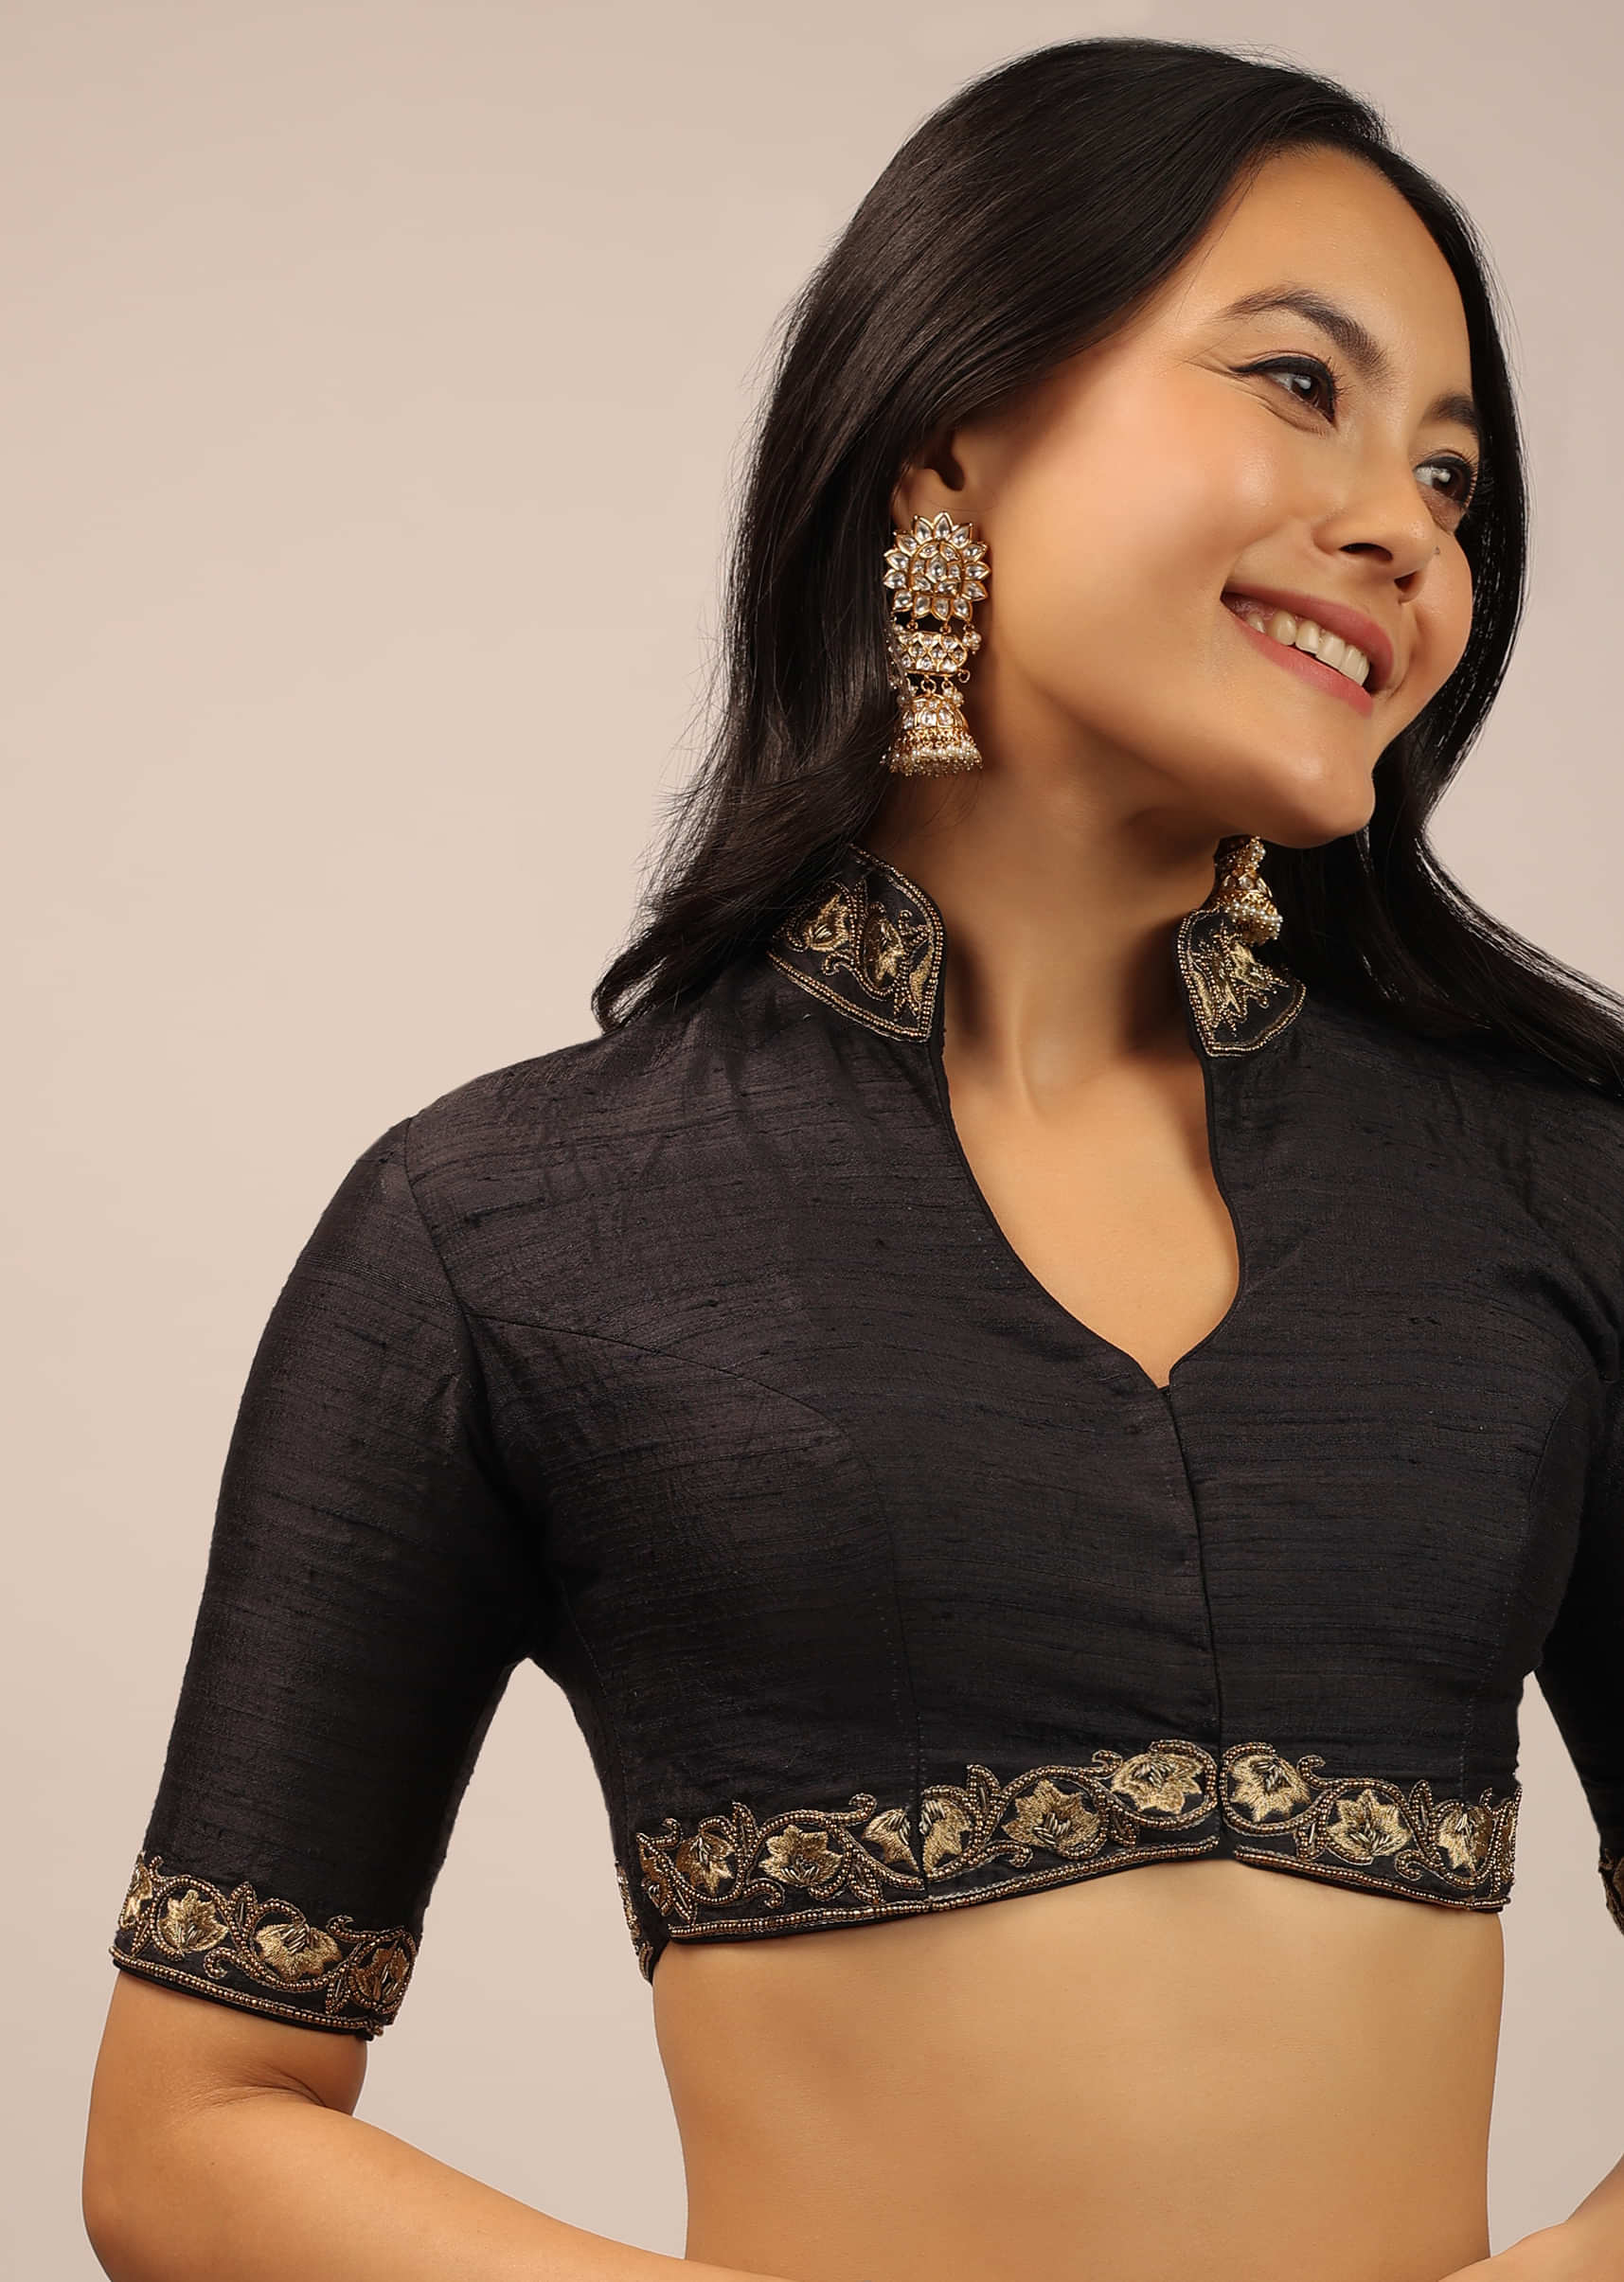 Black Blouse In Raw Silk With Resham And Cut Dana Embroidered Floral Motifs And Mandarin Collar Neckline